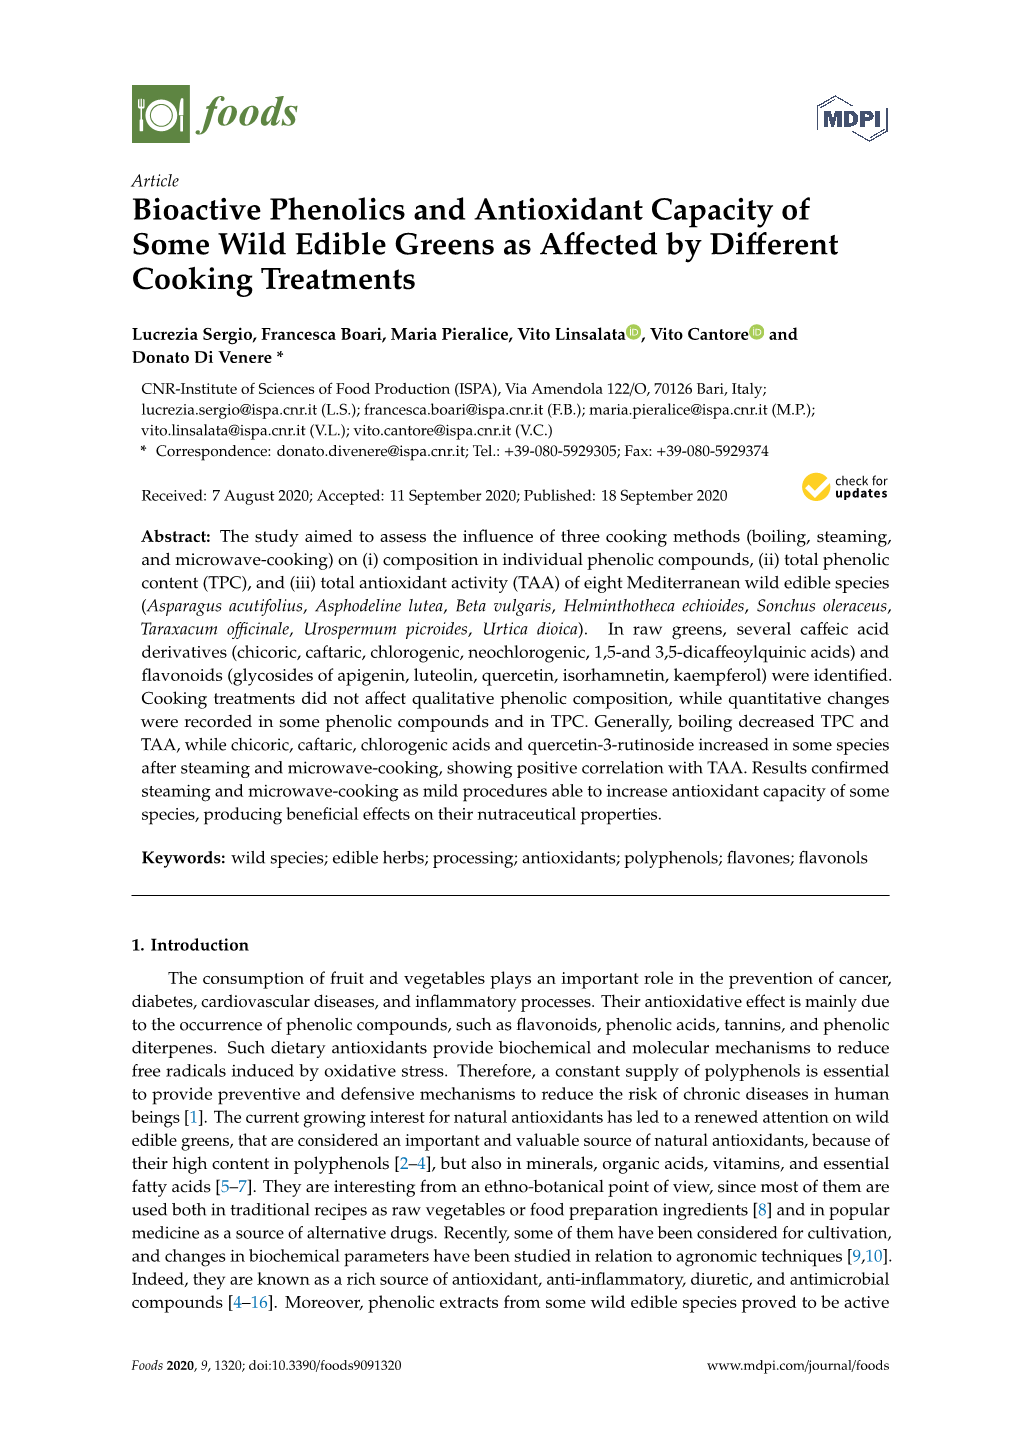 Bioactive Phenolics and Antioxidant Capacity of Some Wild Edible Greens As Aﬀected by Diﬀerent Cooking Treatments